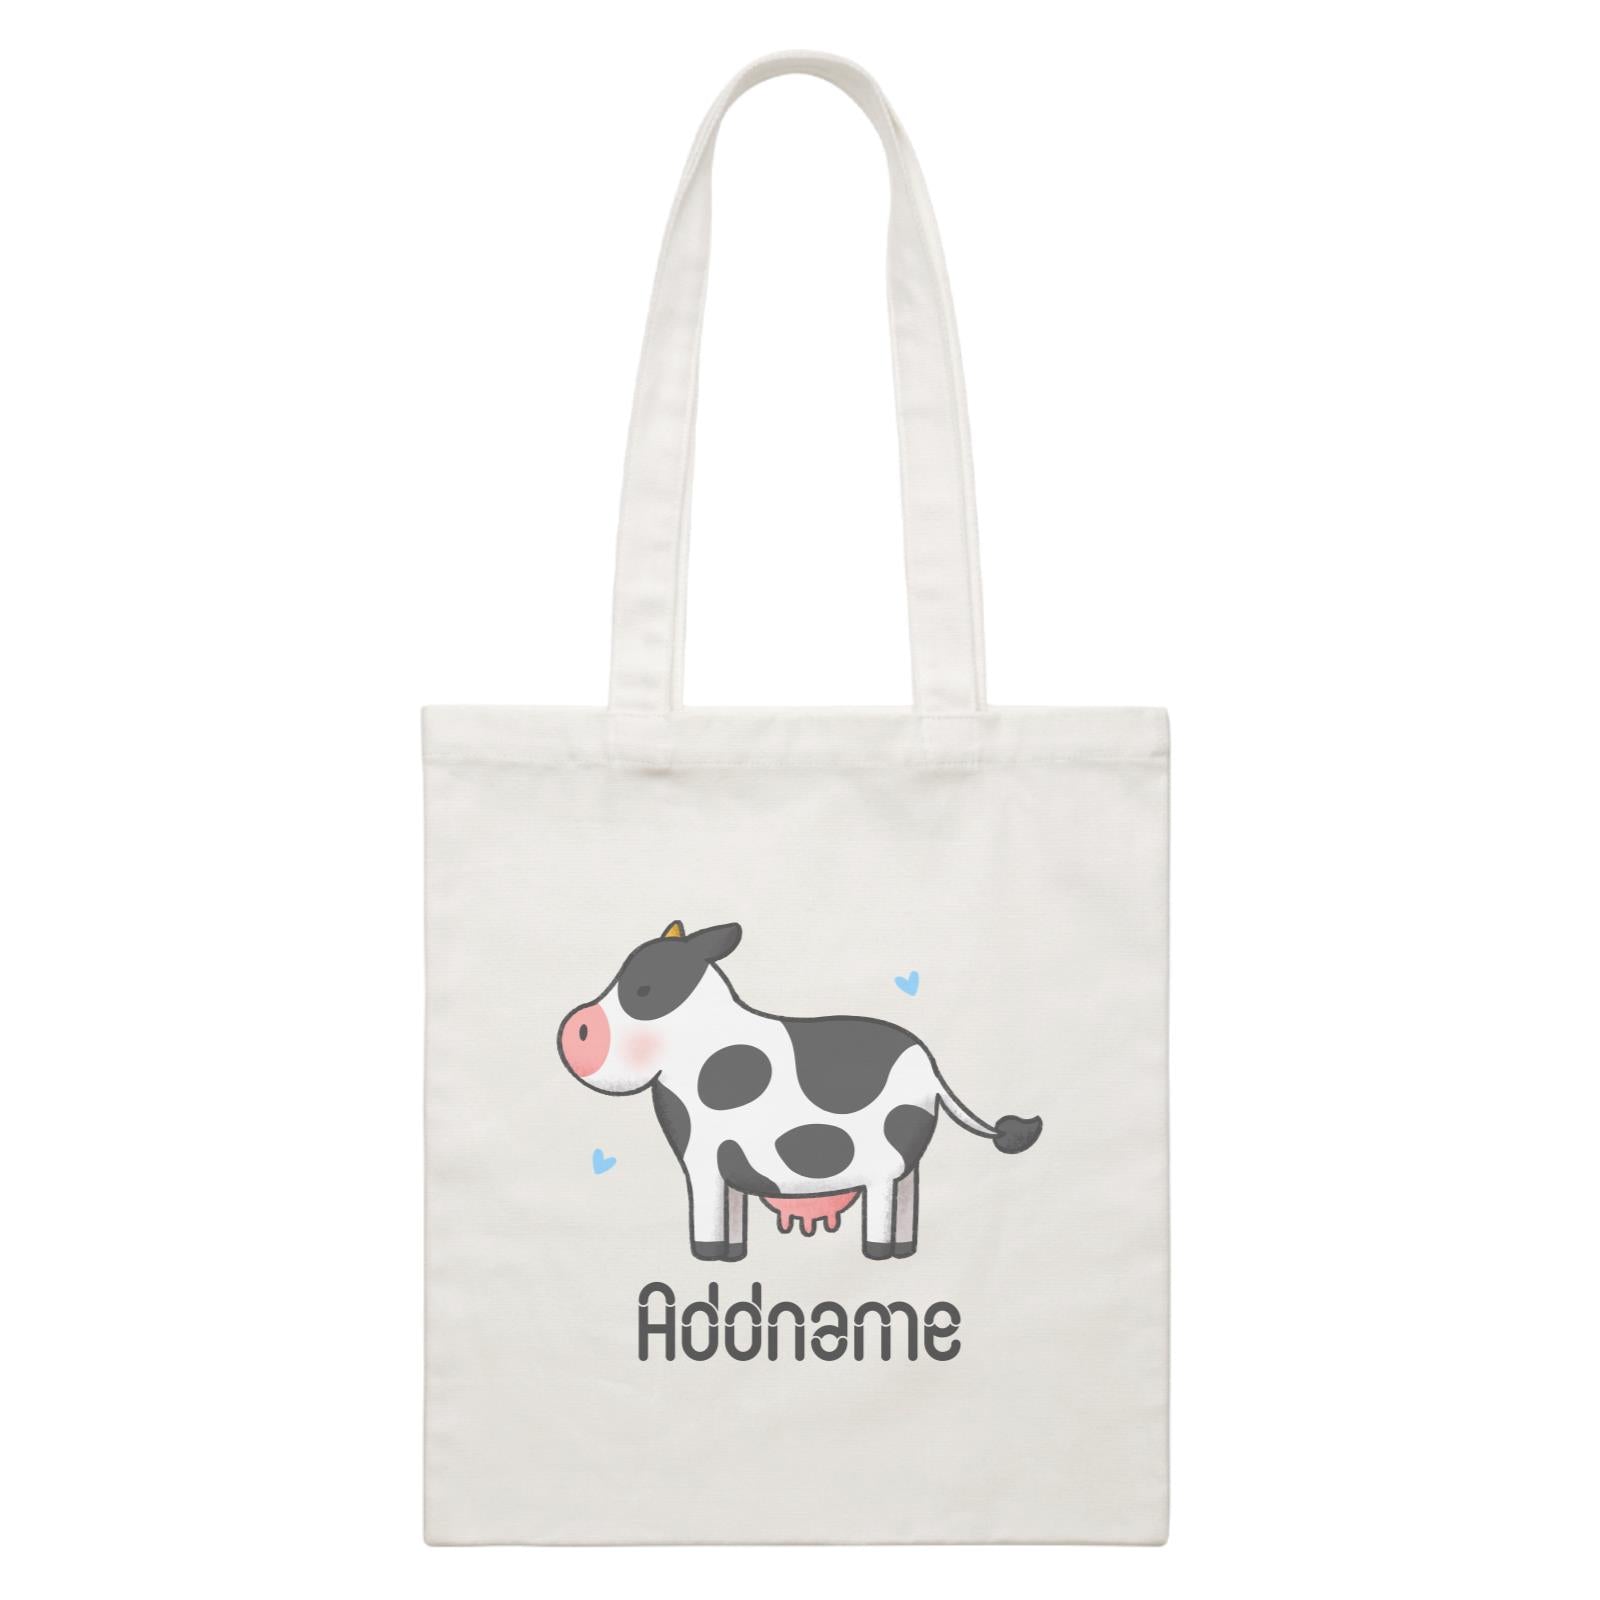 Cute Hand Drawn Style Cow Addname White Canvas Bag